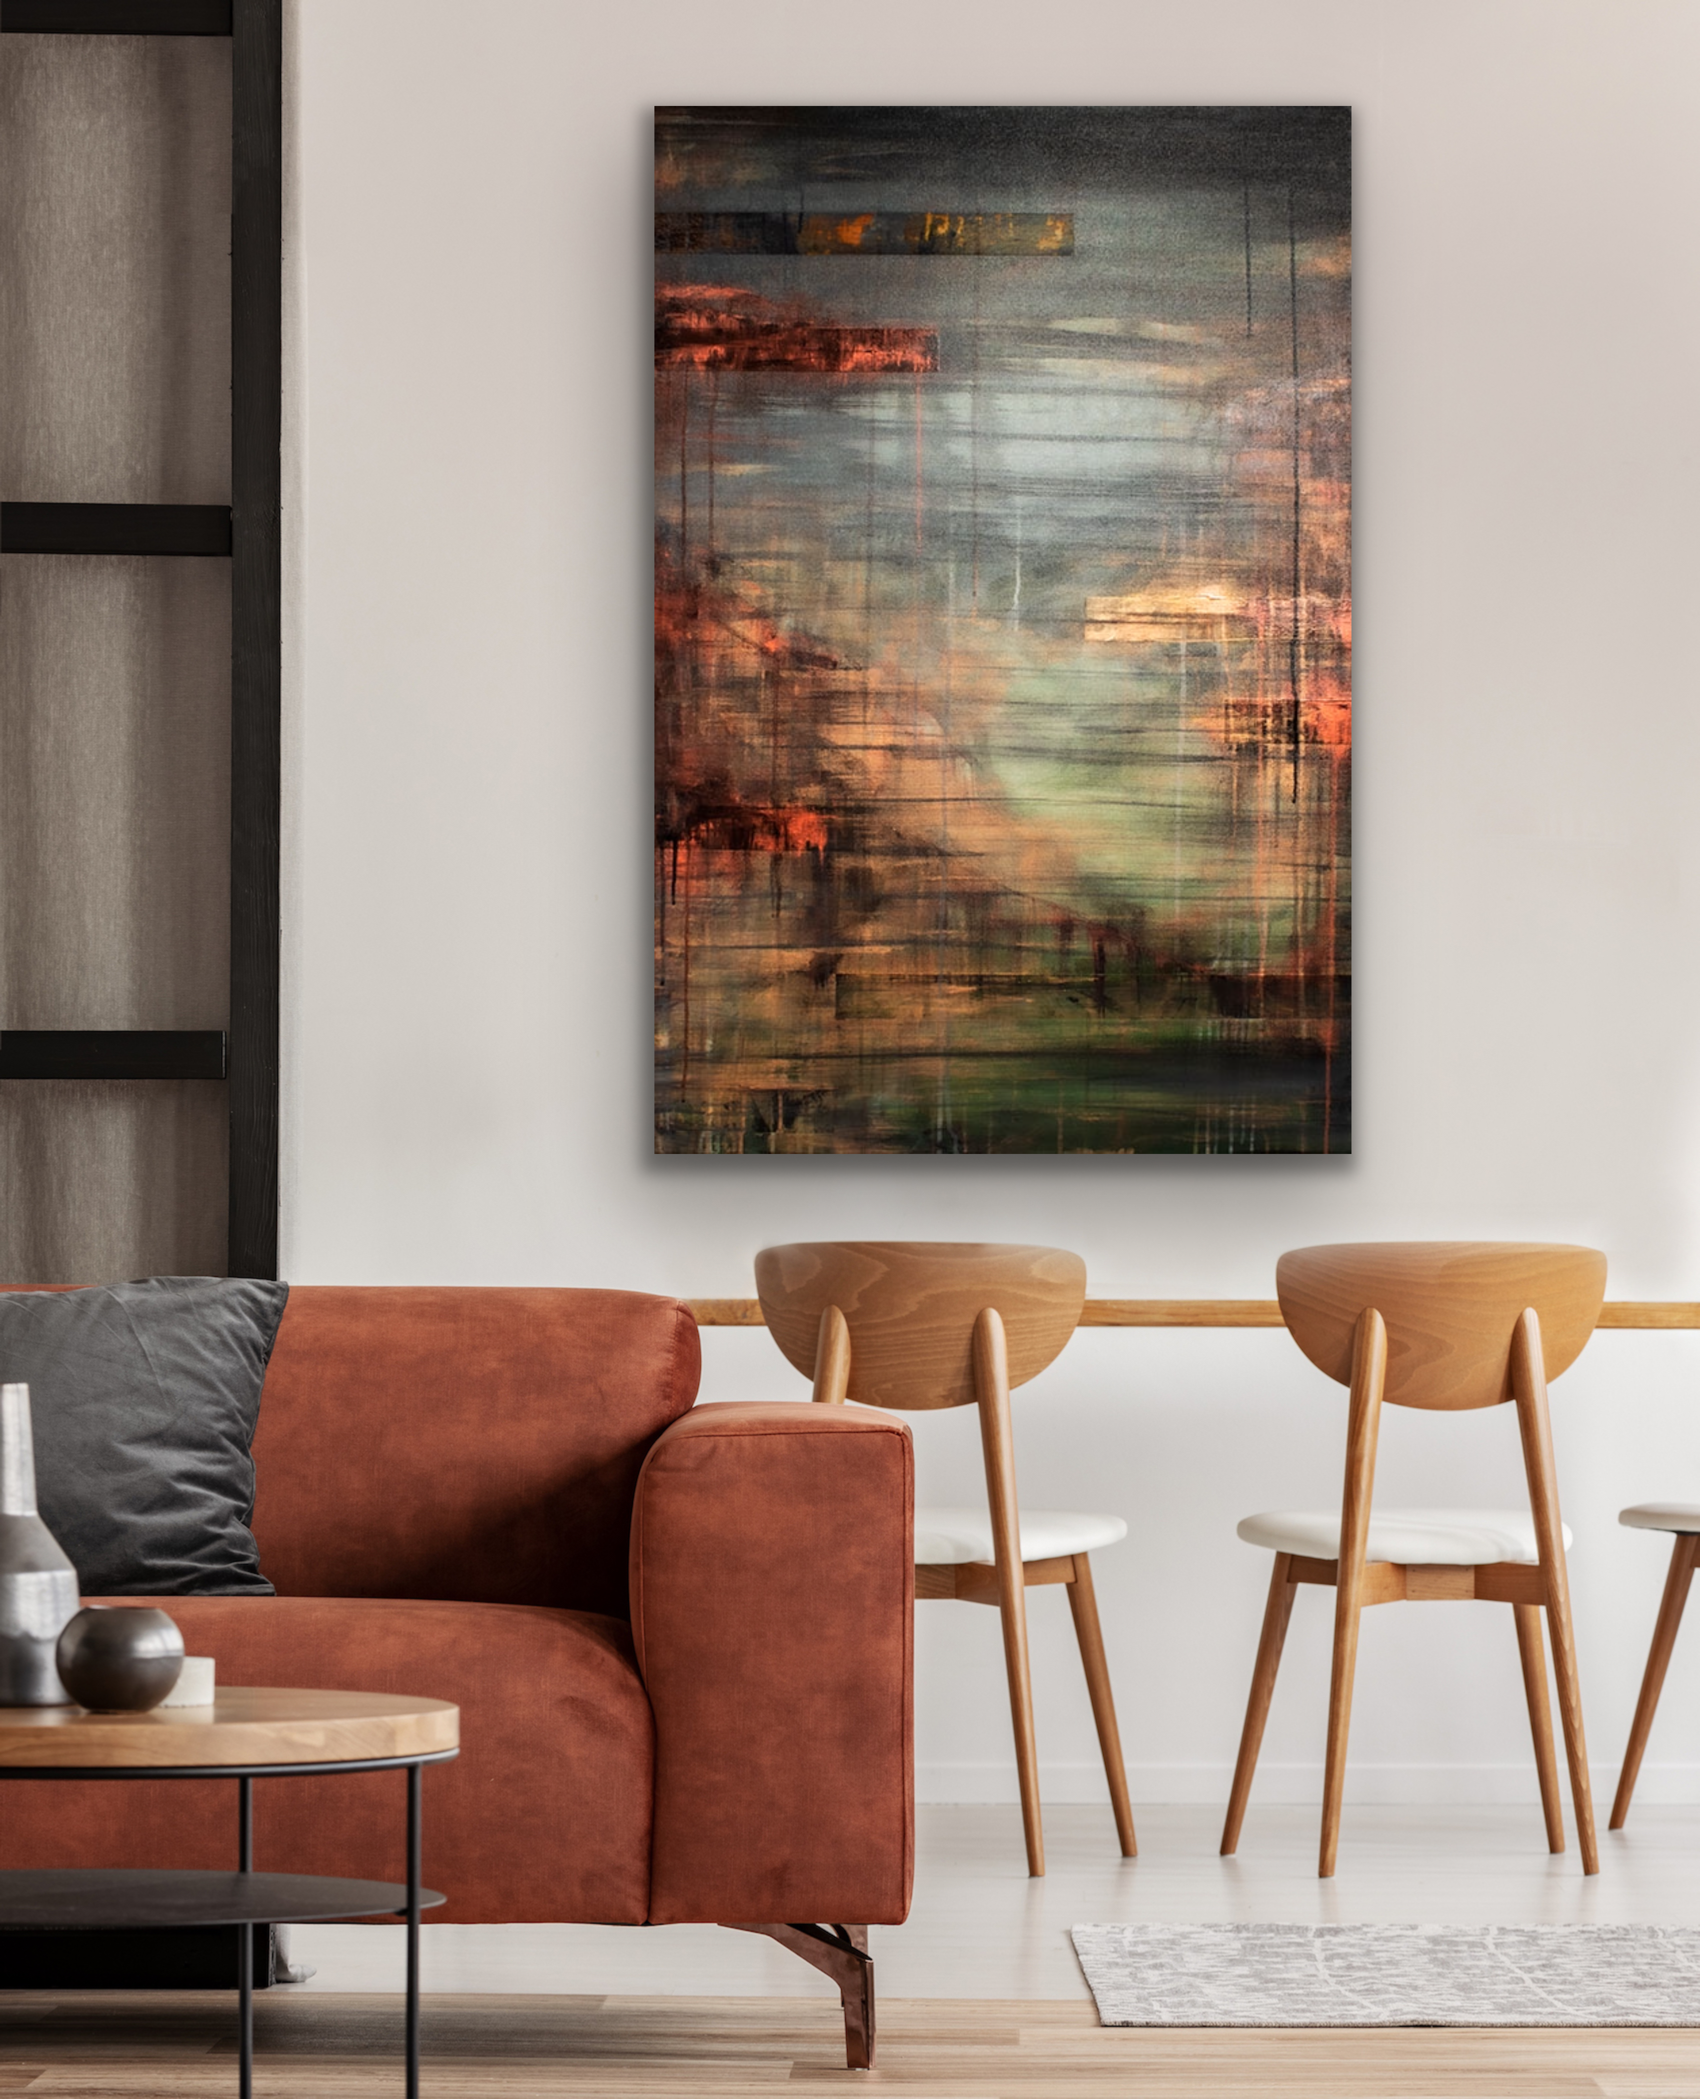 Moments in Time wall art will make a statement in your living room, dining room, hallway or even a bedroom.